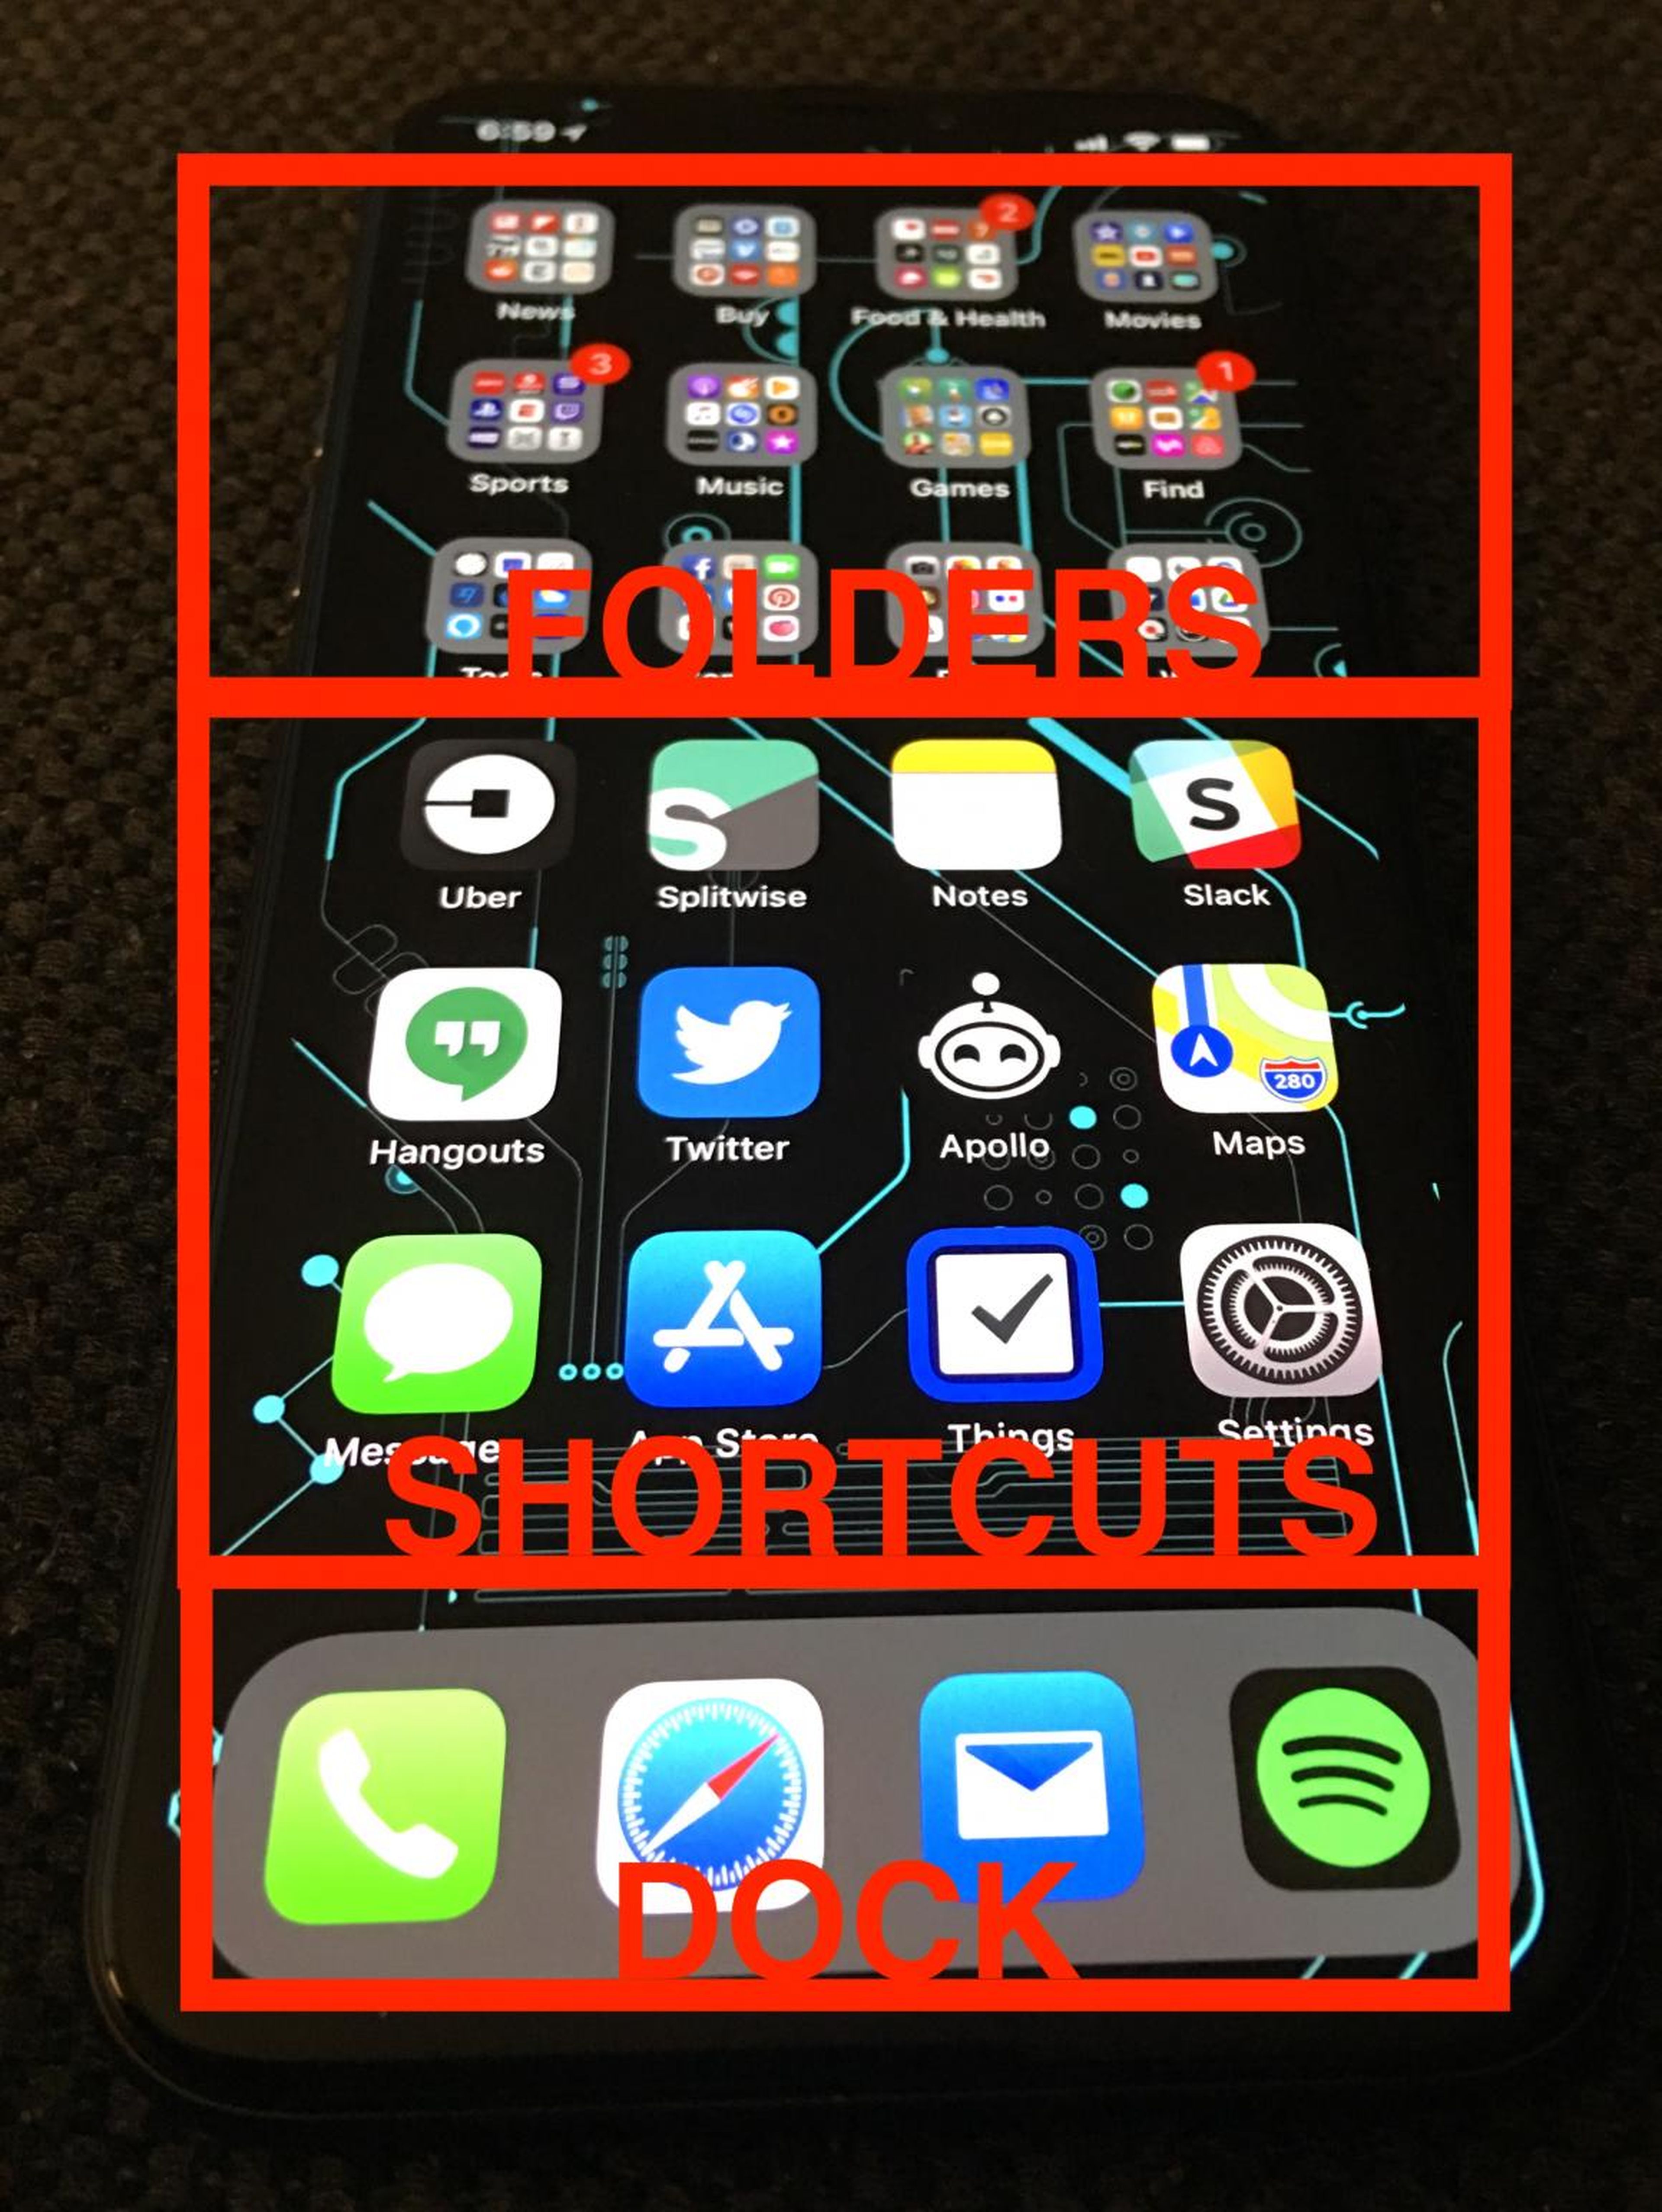 I break my home screen into three sections: The Dock, Shortcuts, and Folders.